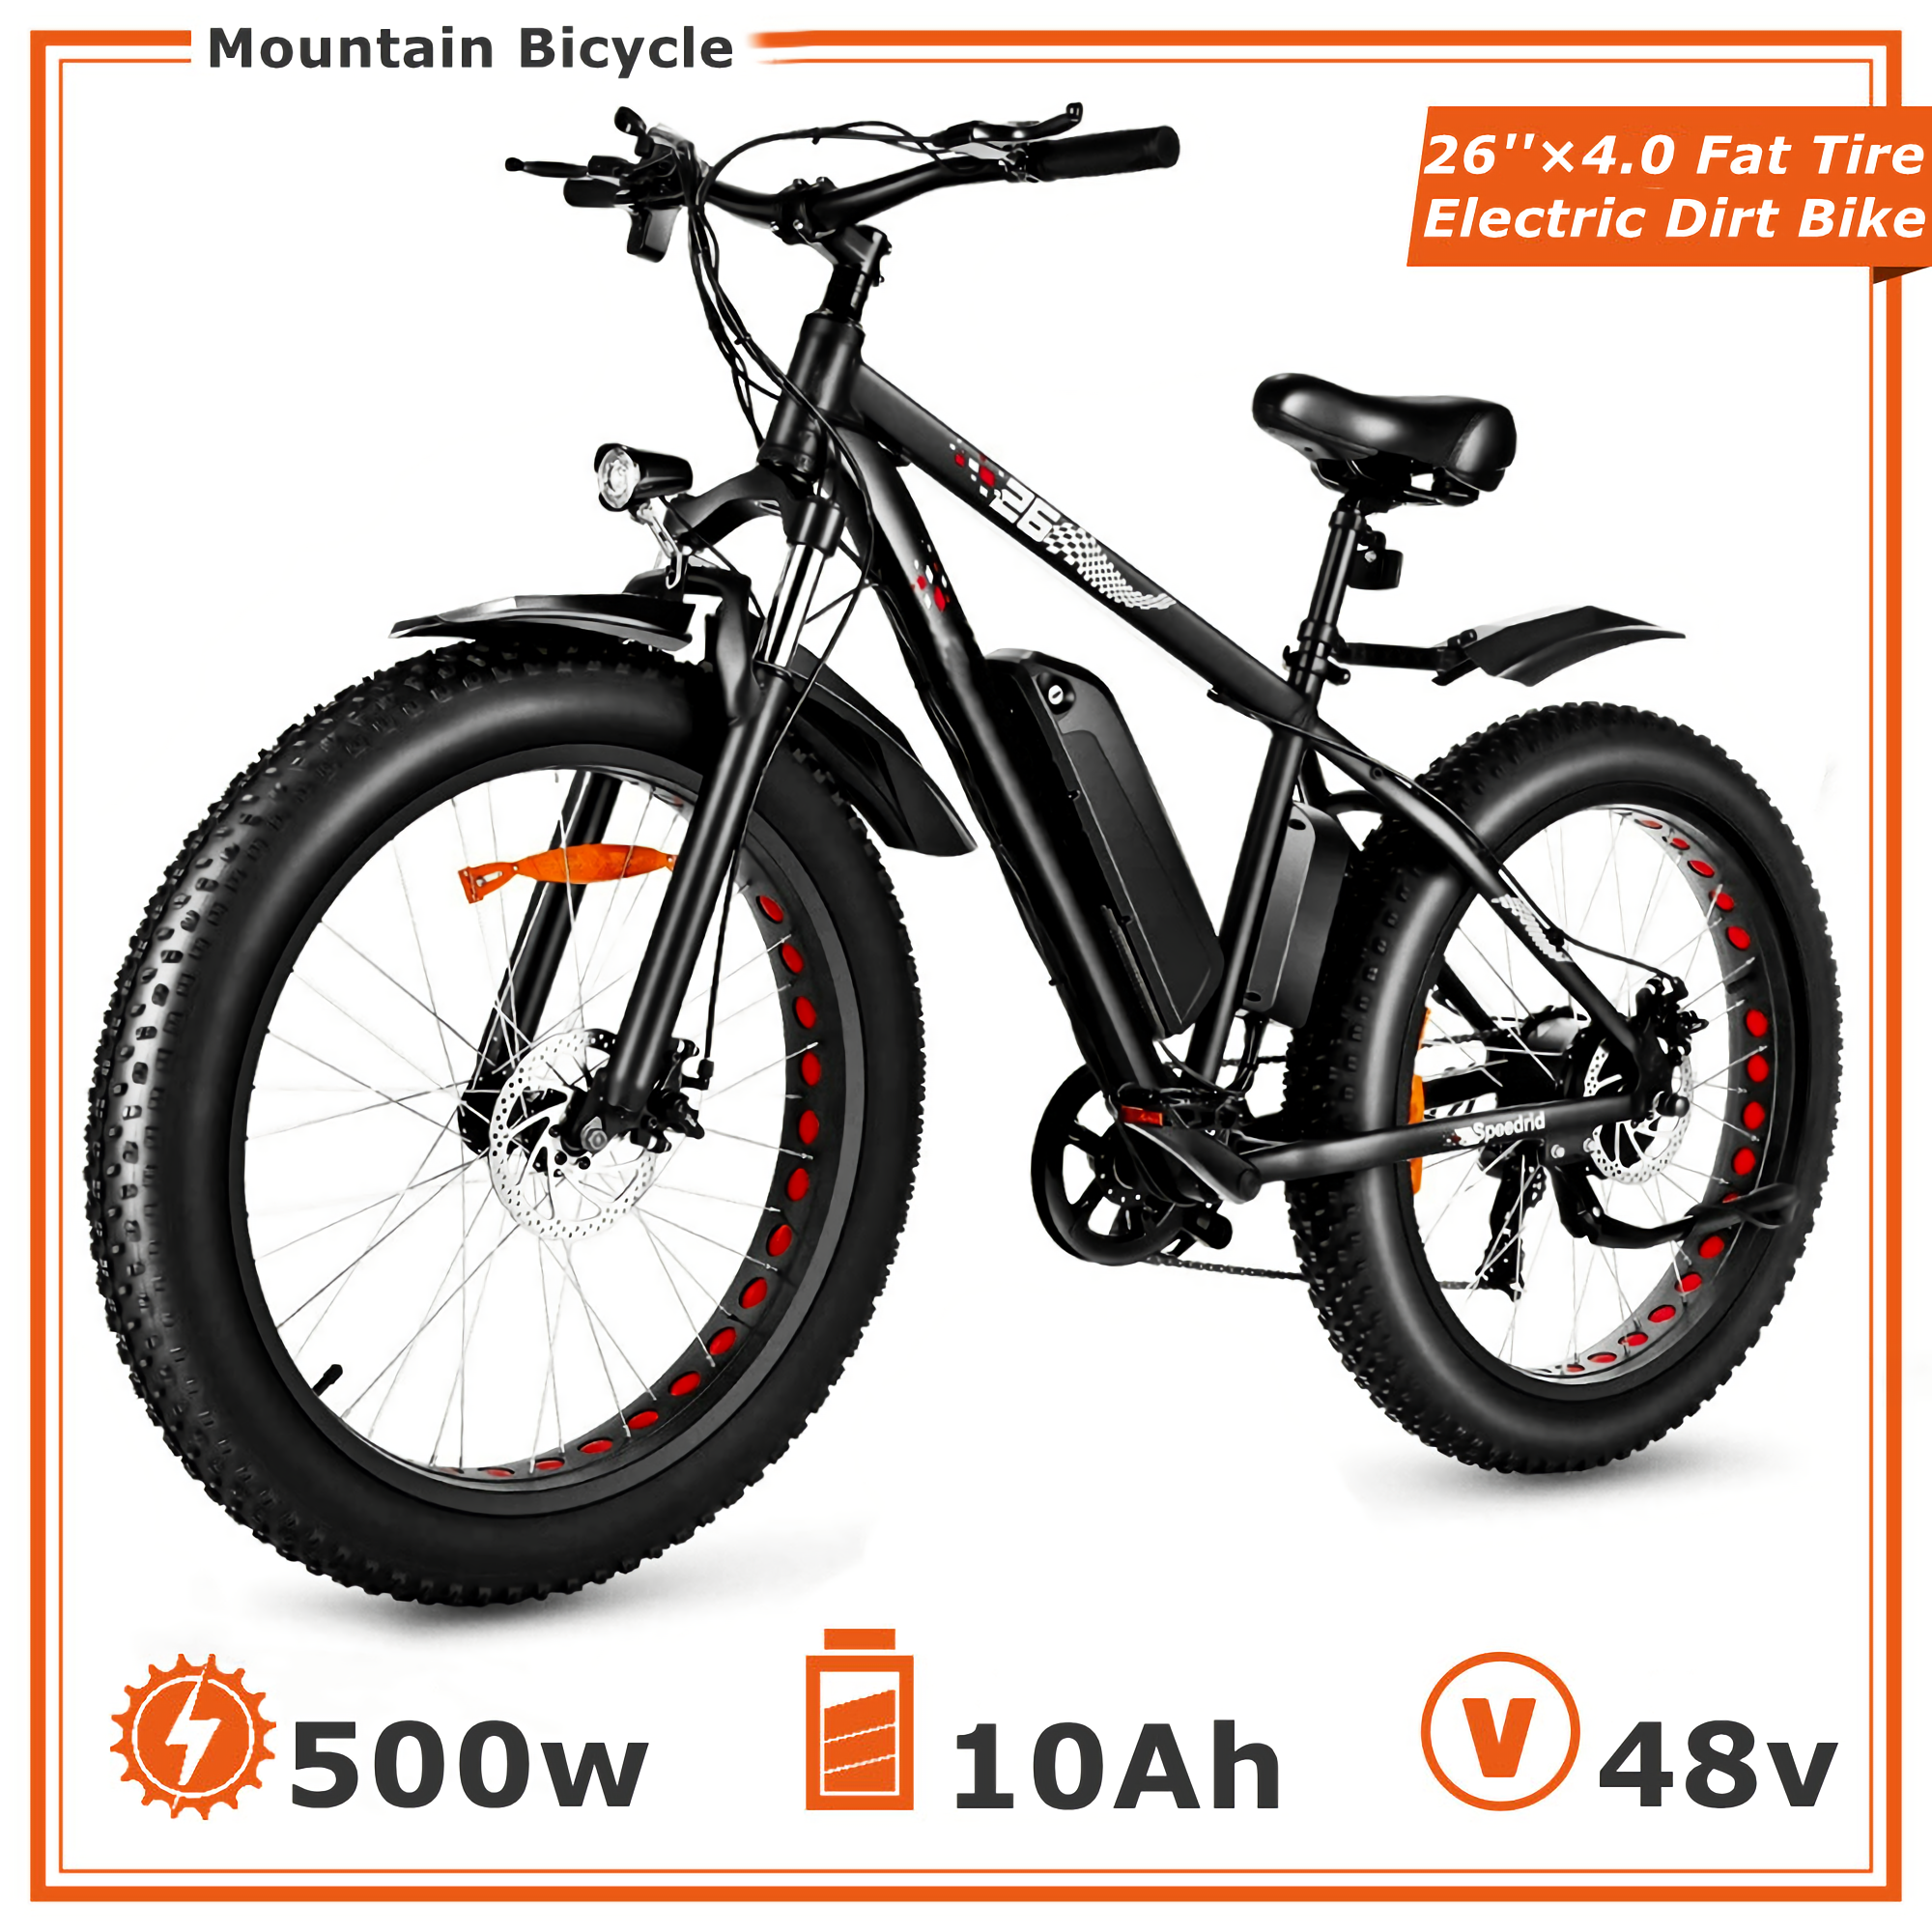 26" 4.0 Electric Mountain Bike Fat Tire Electric Bicycle, 48V 500W Powerful Motor, 48V 10Ah Removable Battery and Derailleur 7 Speed, Snow & Beach Riding